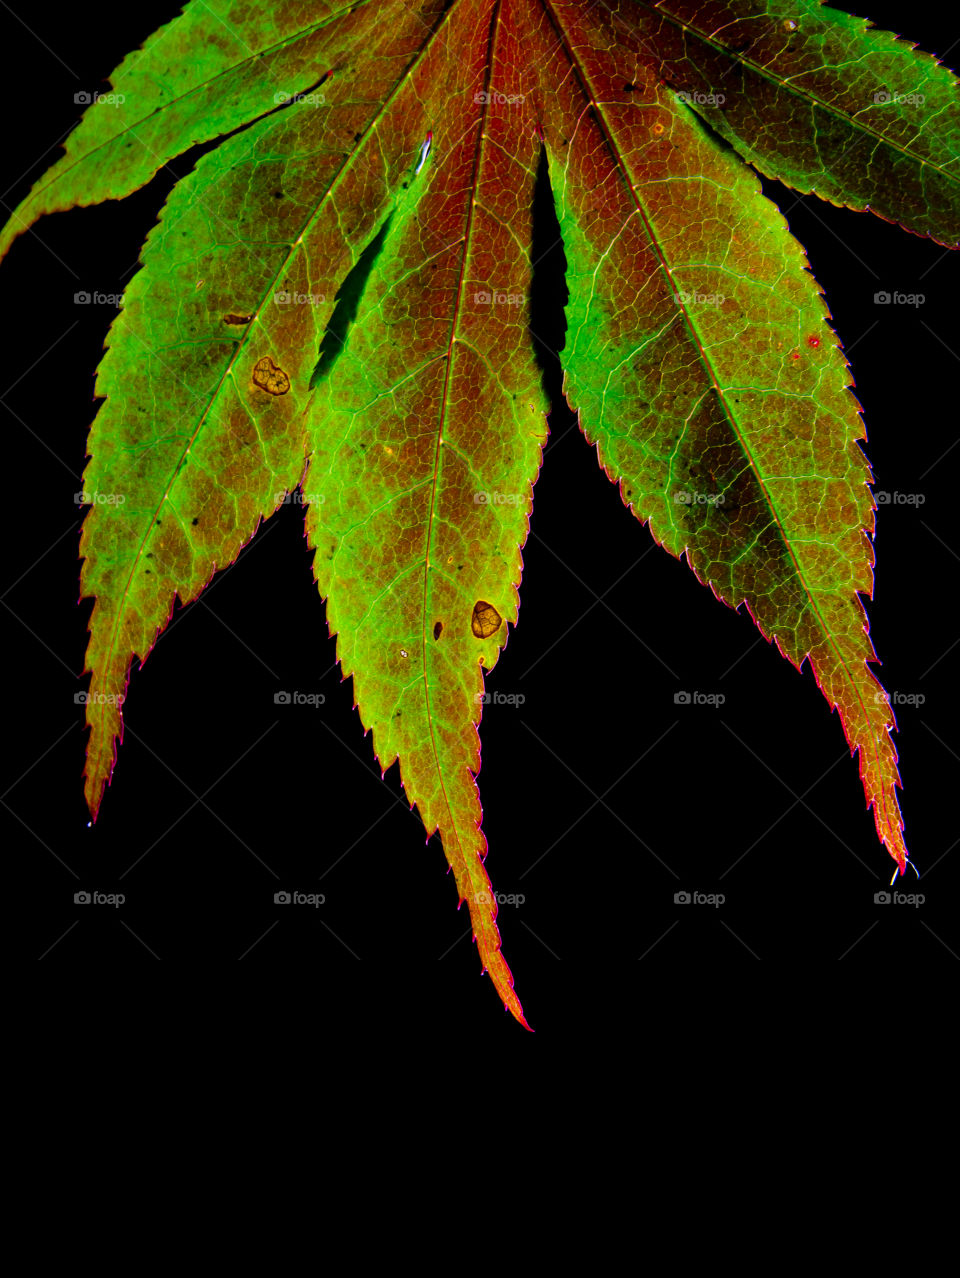 This is a Japanese maple leaf shot against a black background close up with sharp detail. This is not a marijuana leaf I assure you. 